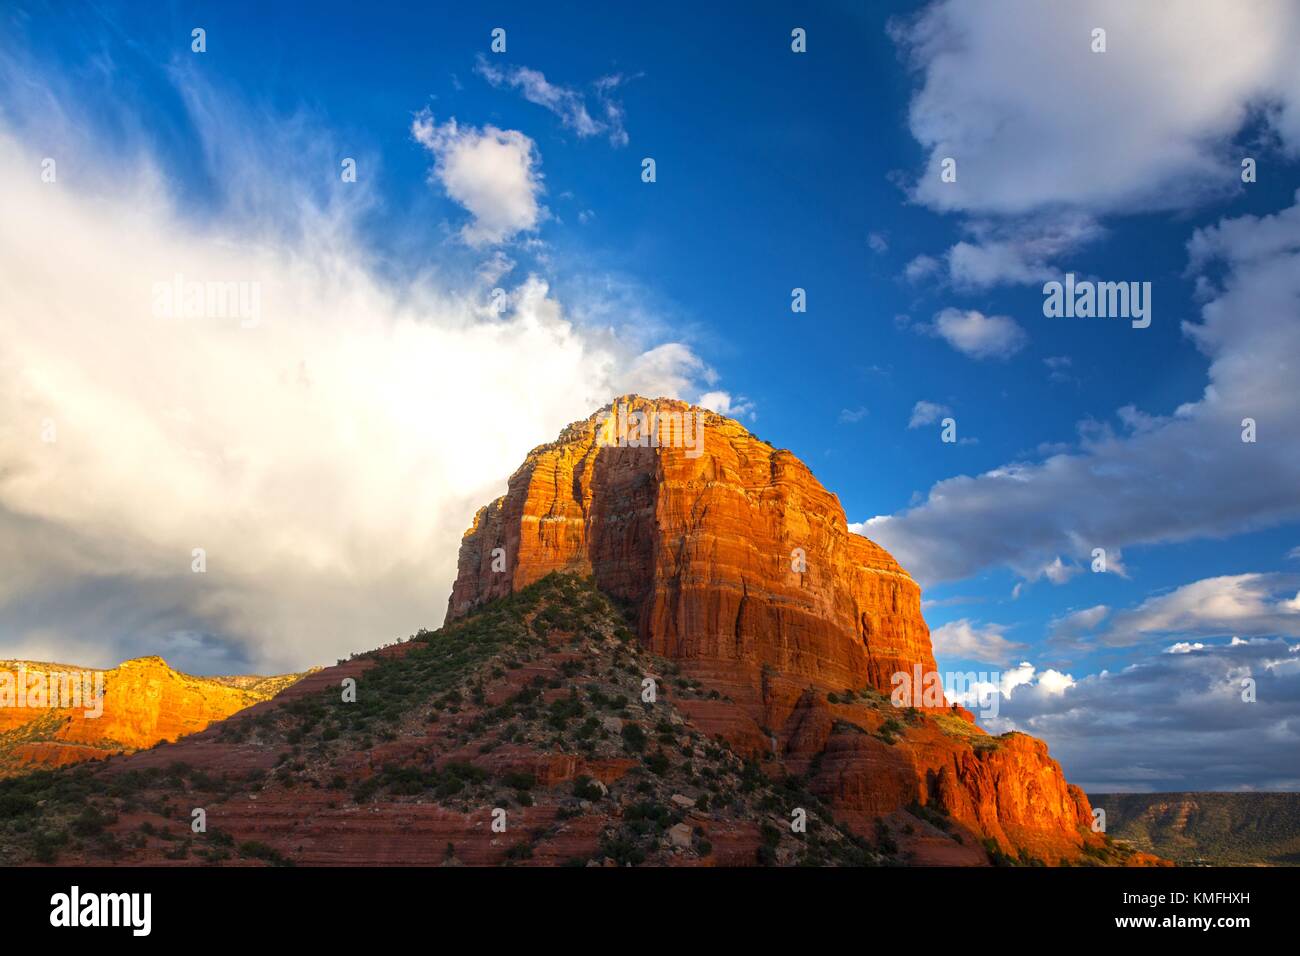 Courthouse Butte Rock Feature and Dramatic Sunset Sky Landscape near Oak Creek Village in West Sedona Arizona United States Stock Photo